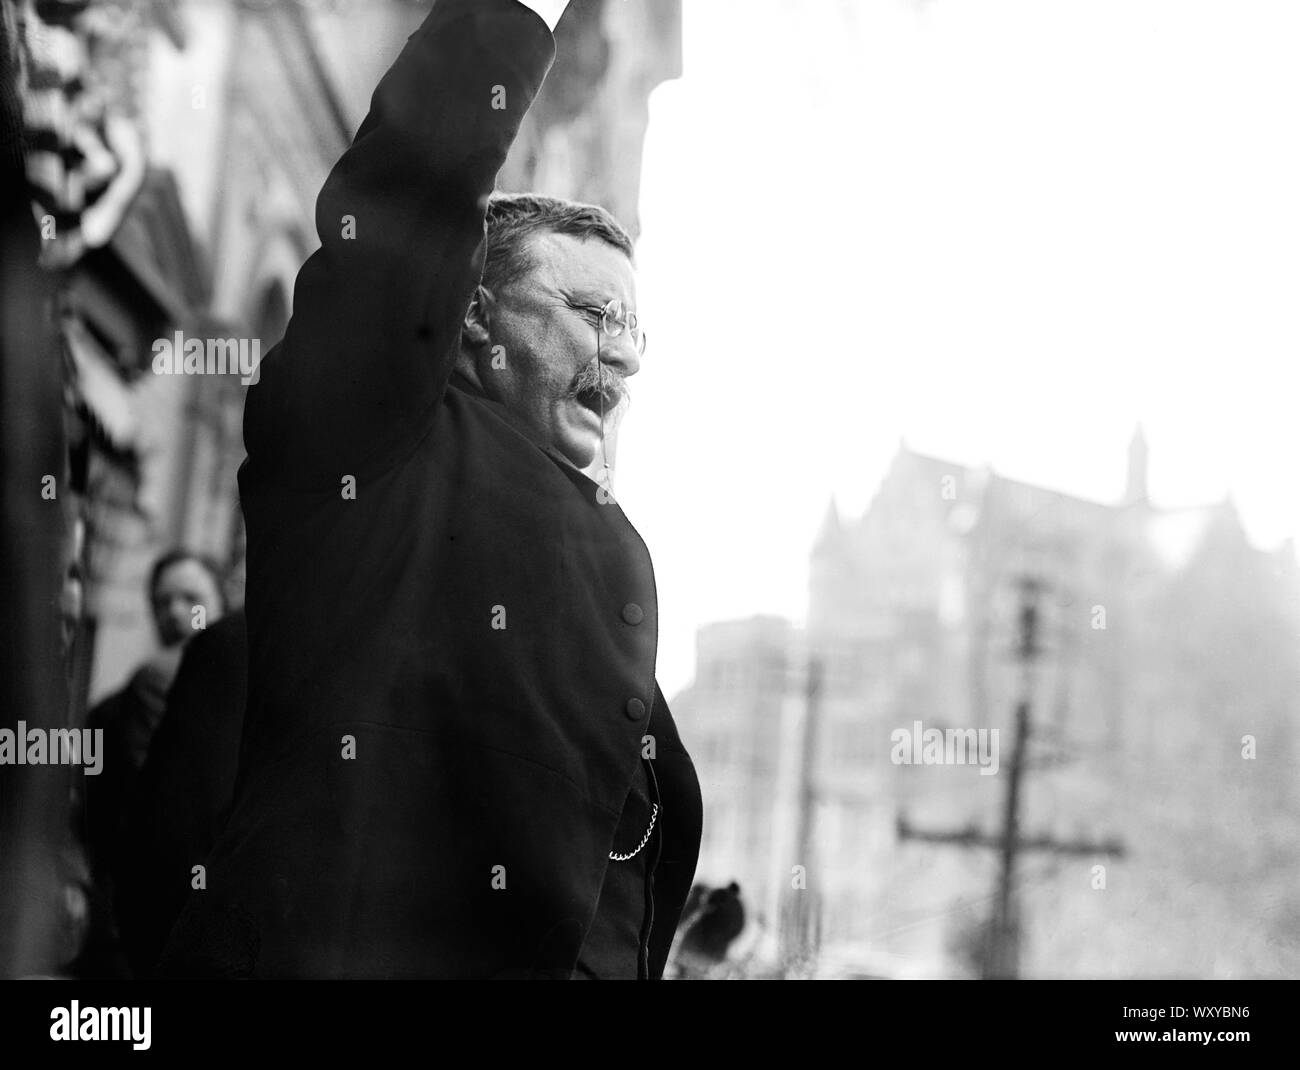 Theodore Roosevelt Waving to Crowd upon Arrival in the United States after Traveling to Europe and Africa for a Year, New York City, New York, USA, Bain News Service, June 18, 1910 Stock Photo